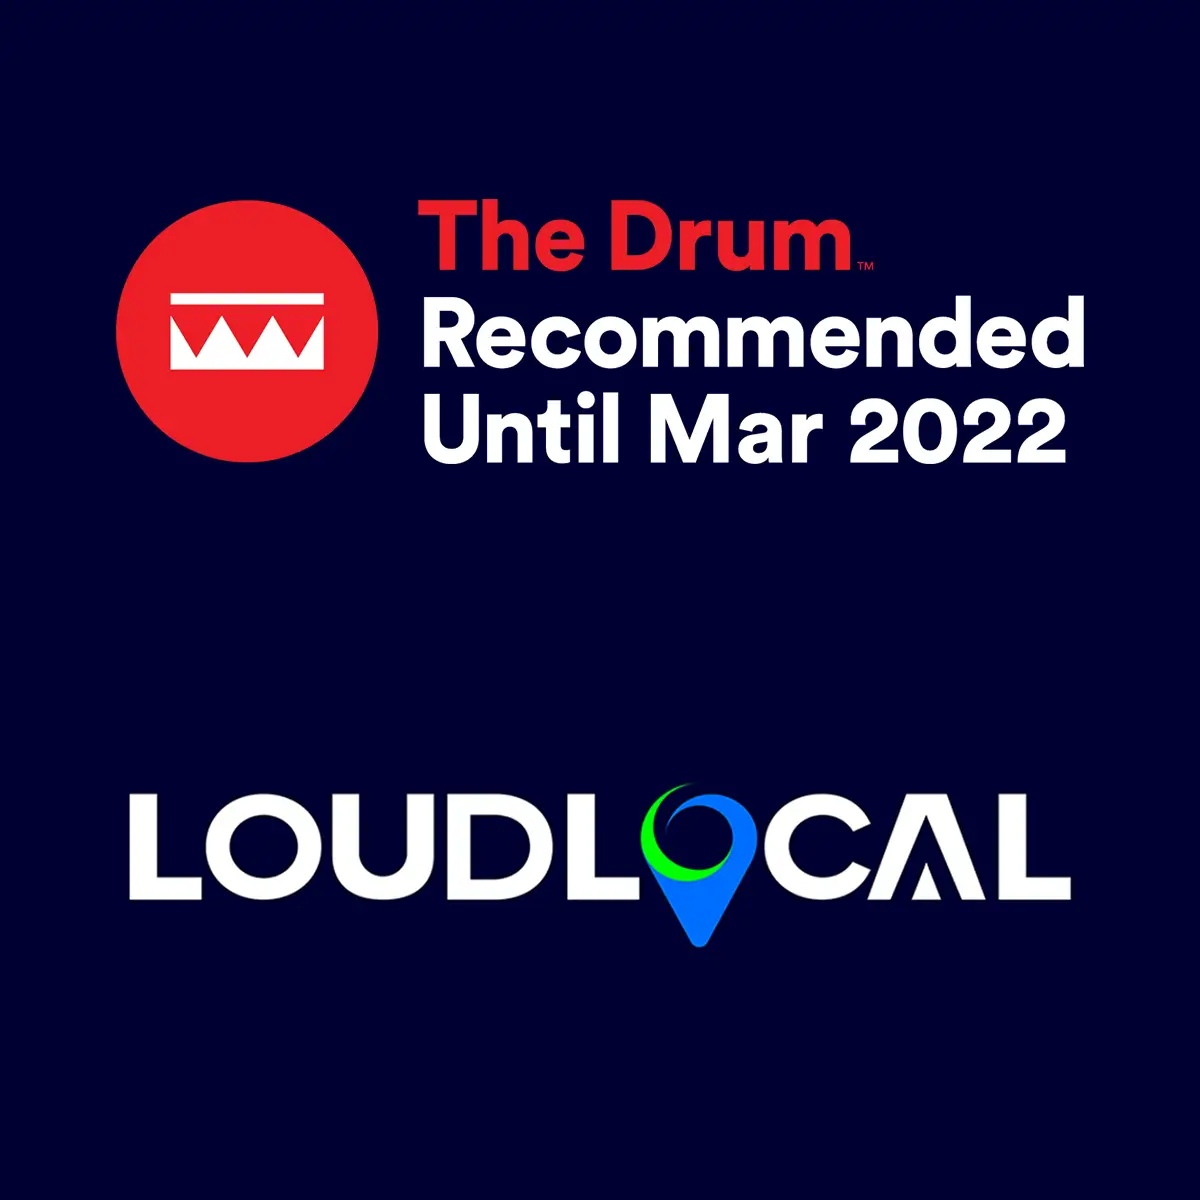 The Drum recommended marketing agency register LoudLocal